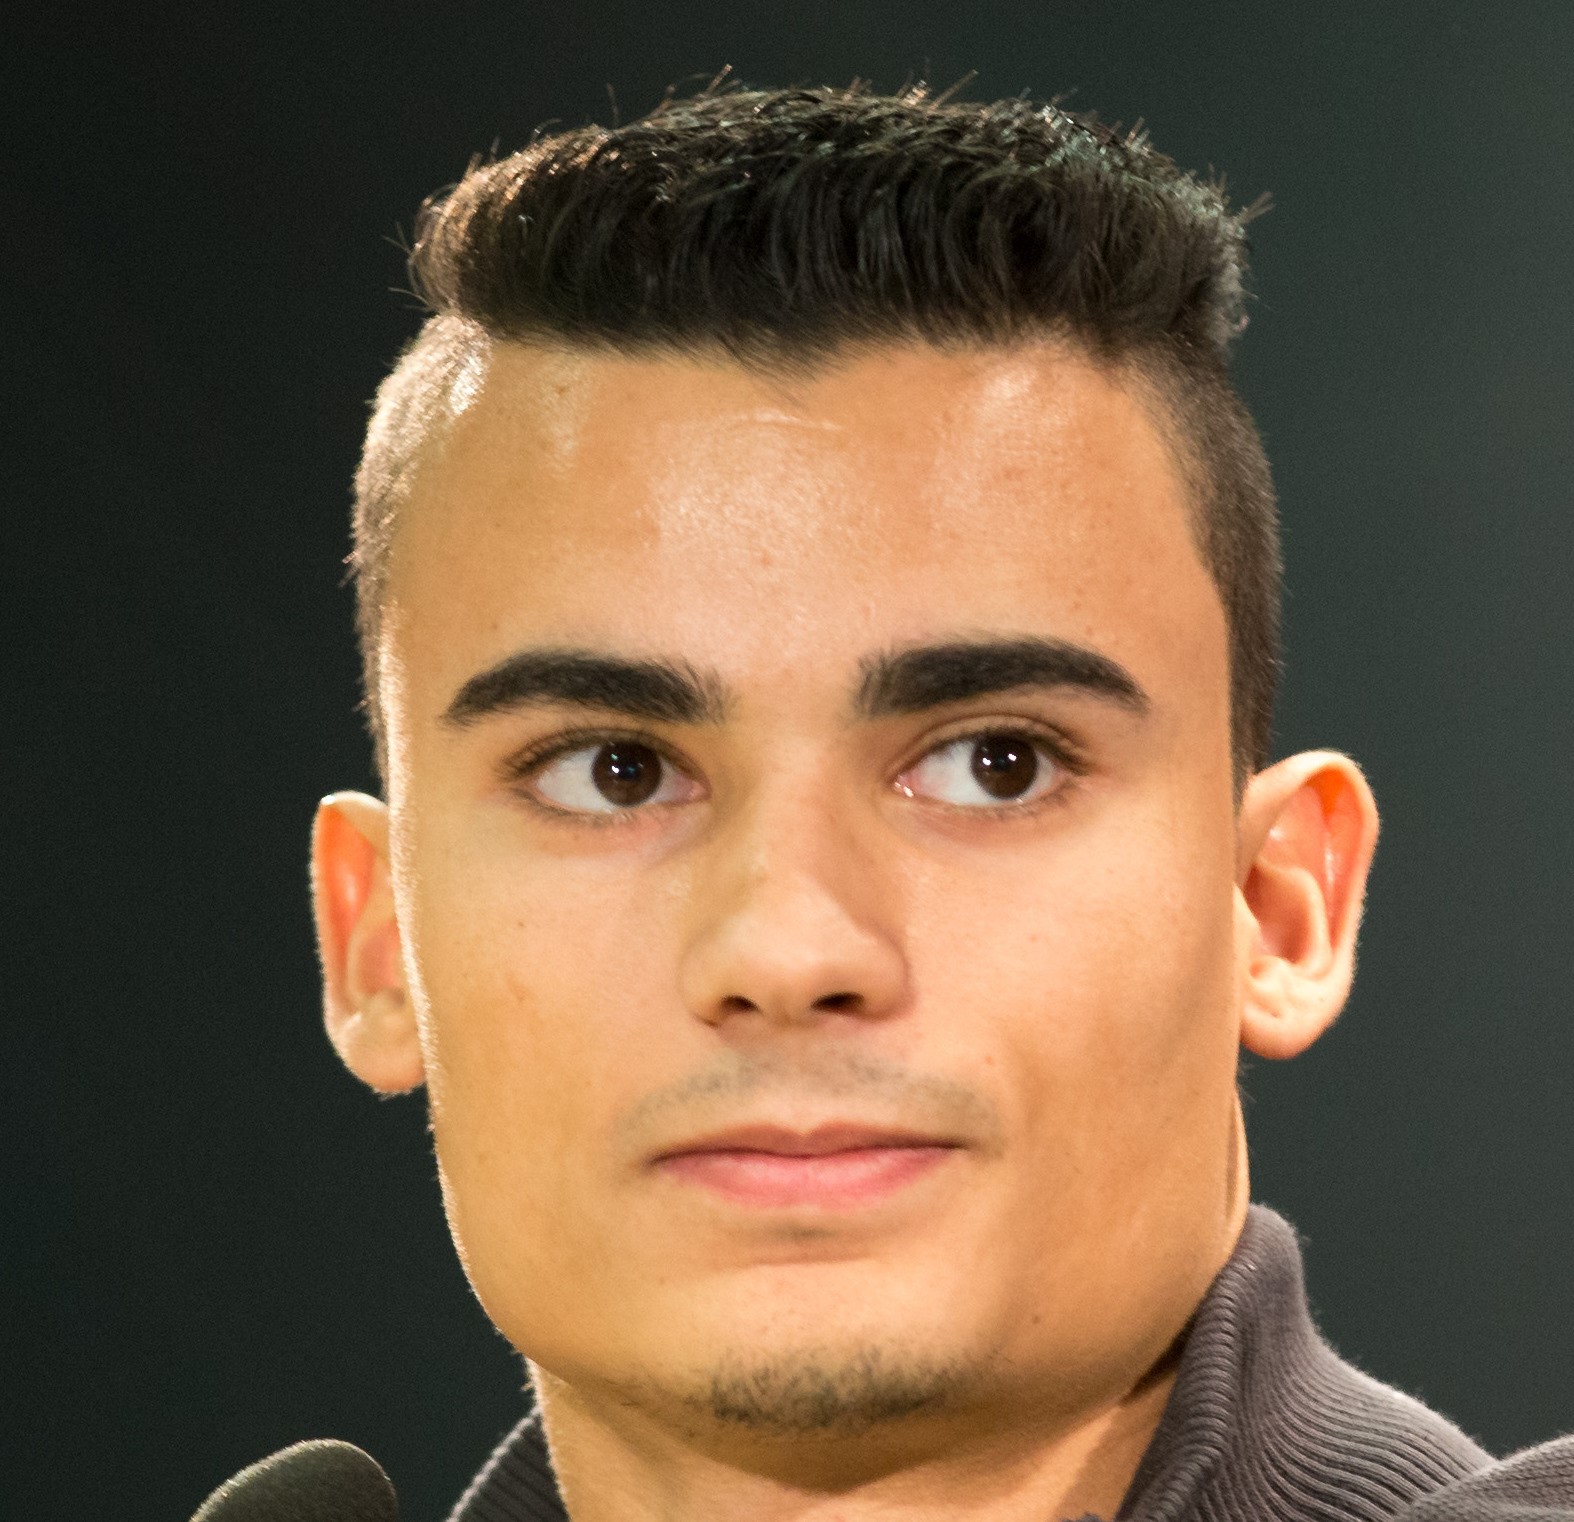 As part of the deal to get Mercedes engines, Manor has made Pascal Wehrlein #1